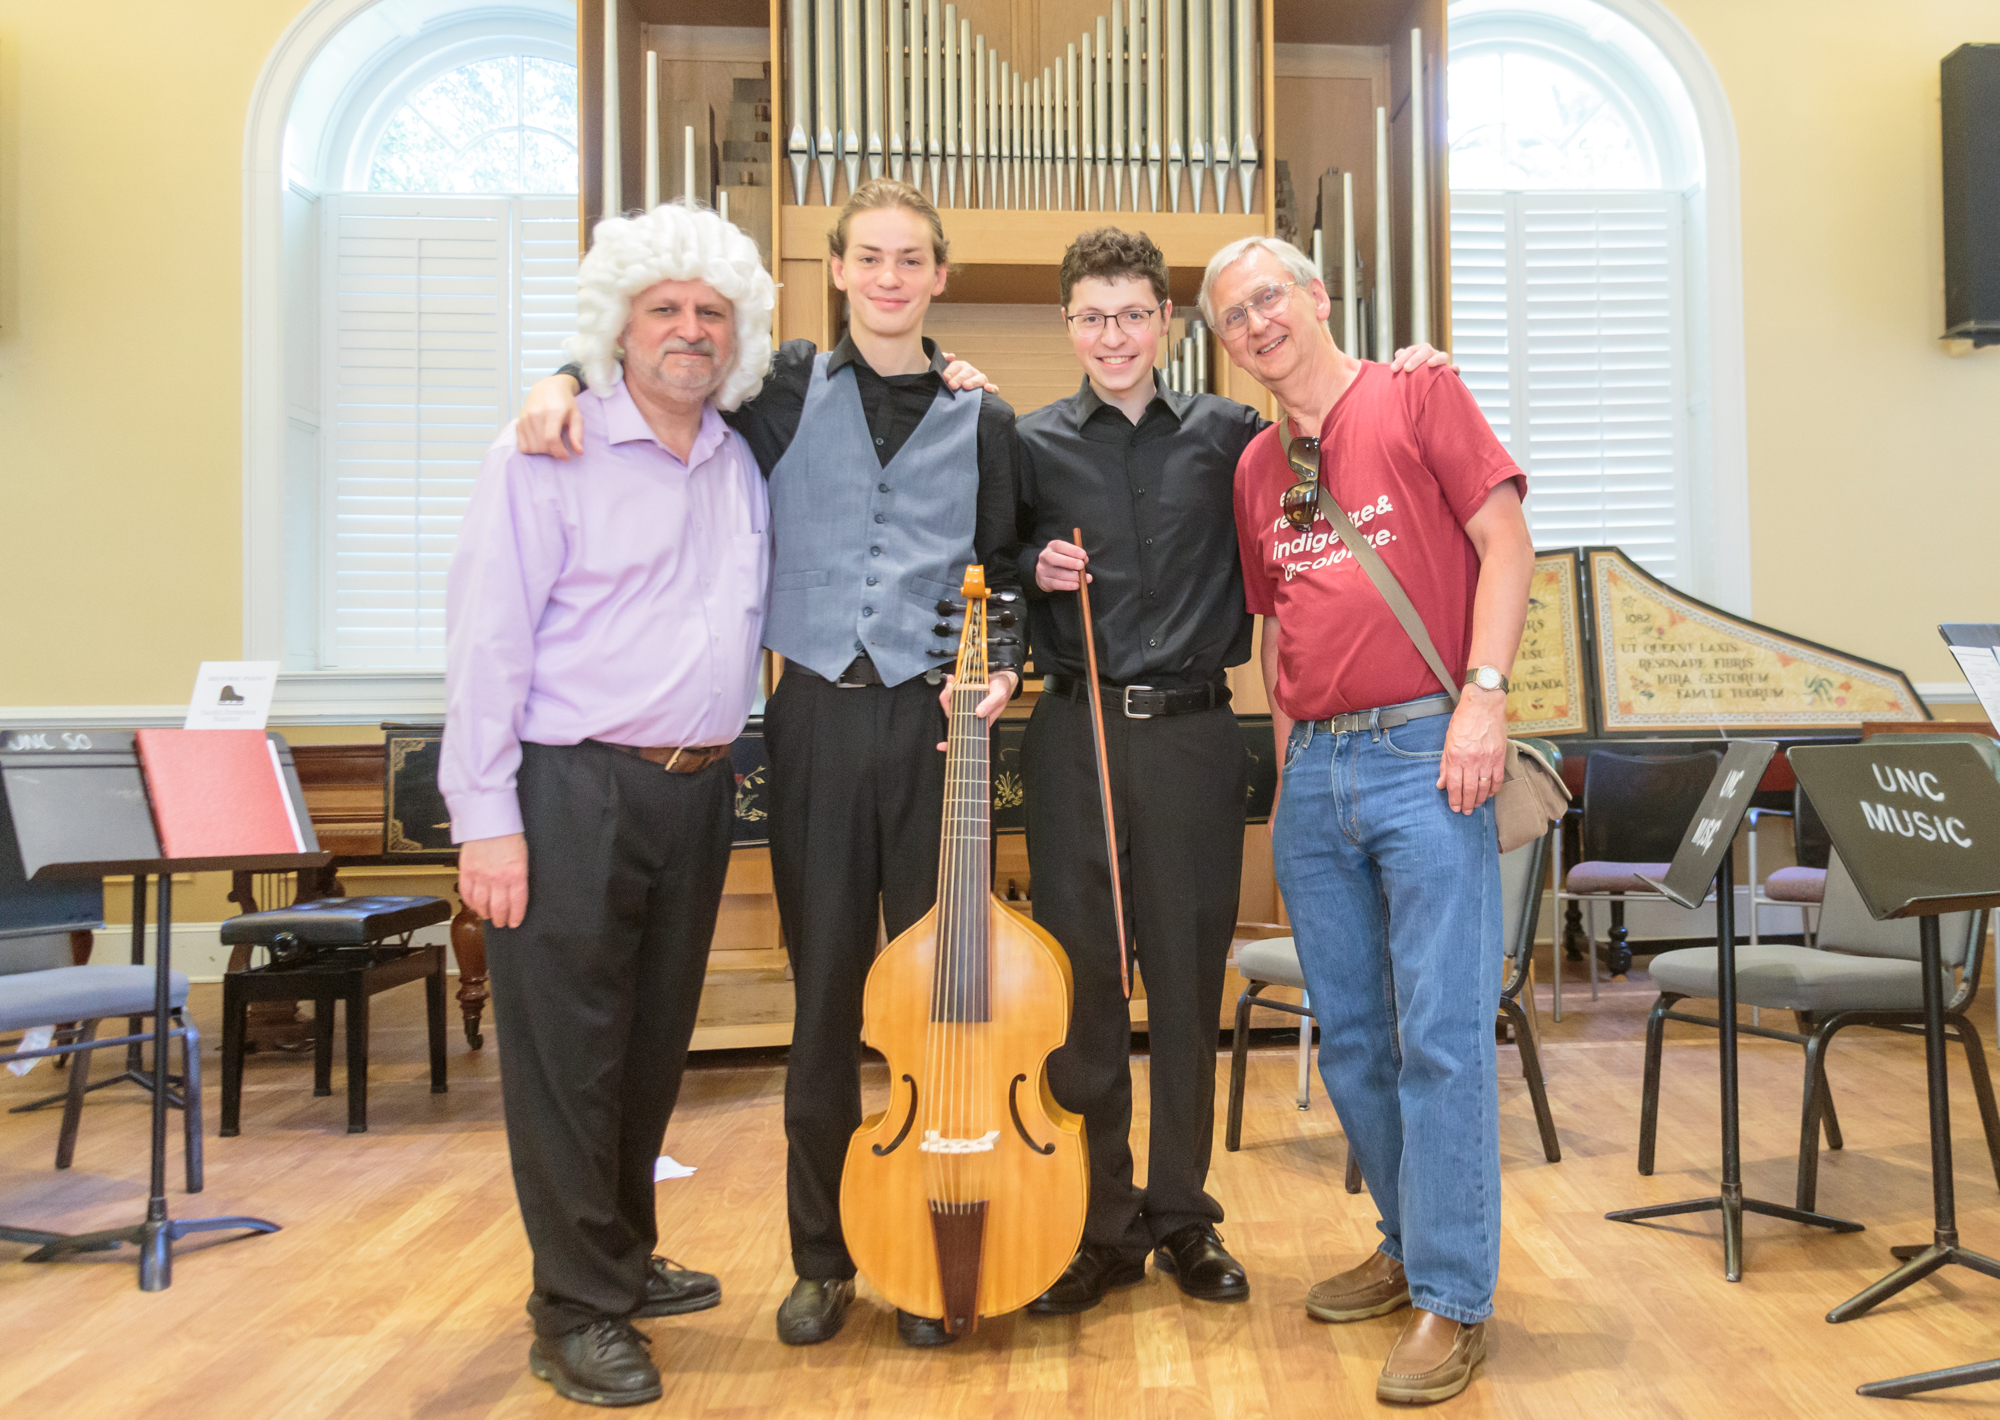 Professor Brent Wissick, Barron Northrup, Corbin Bryan, and John Pringle after the UNC Baroque Ensemble and Consort of Viols concert on April 28, 2019. (Photo by Max Bazil)